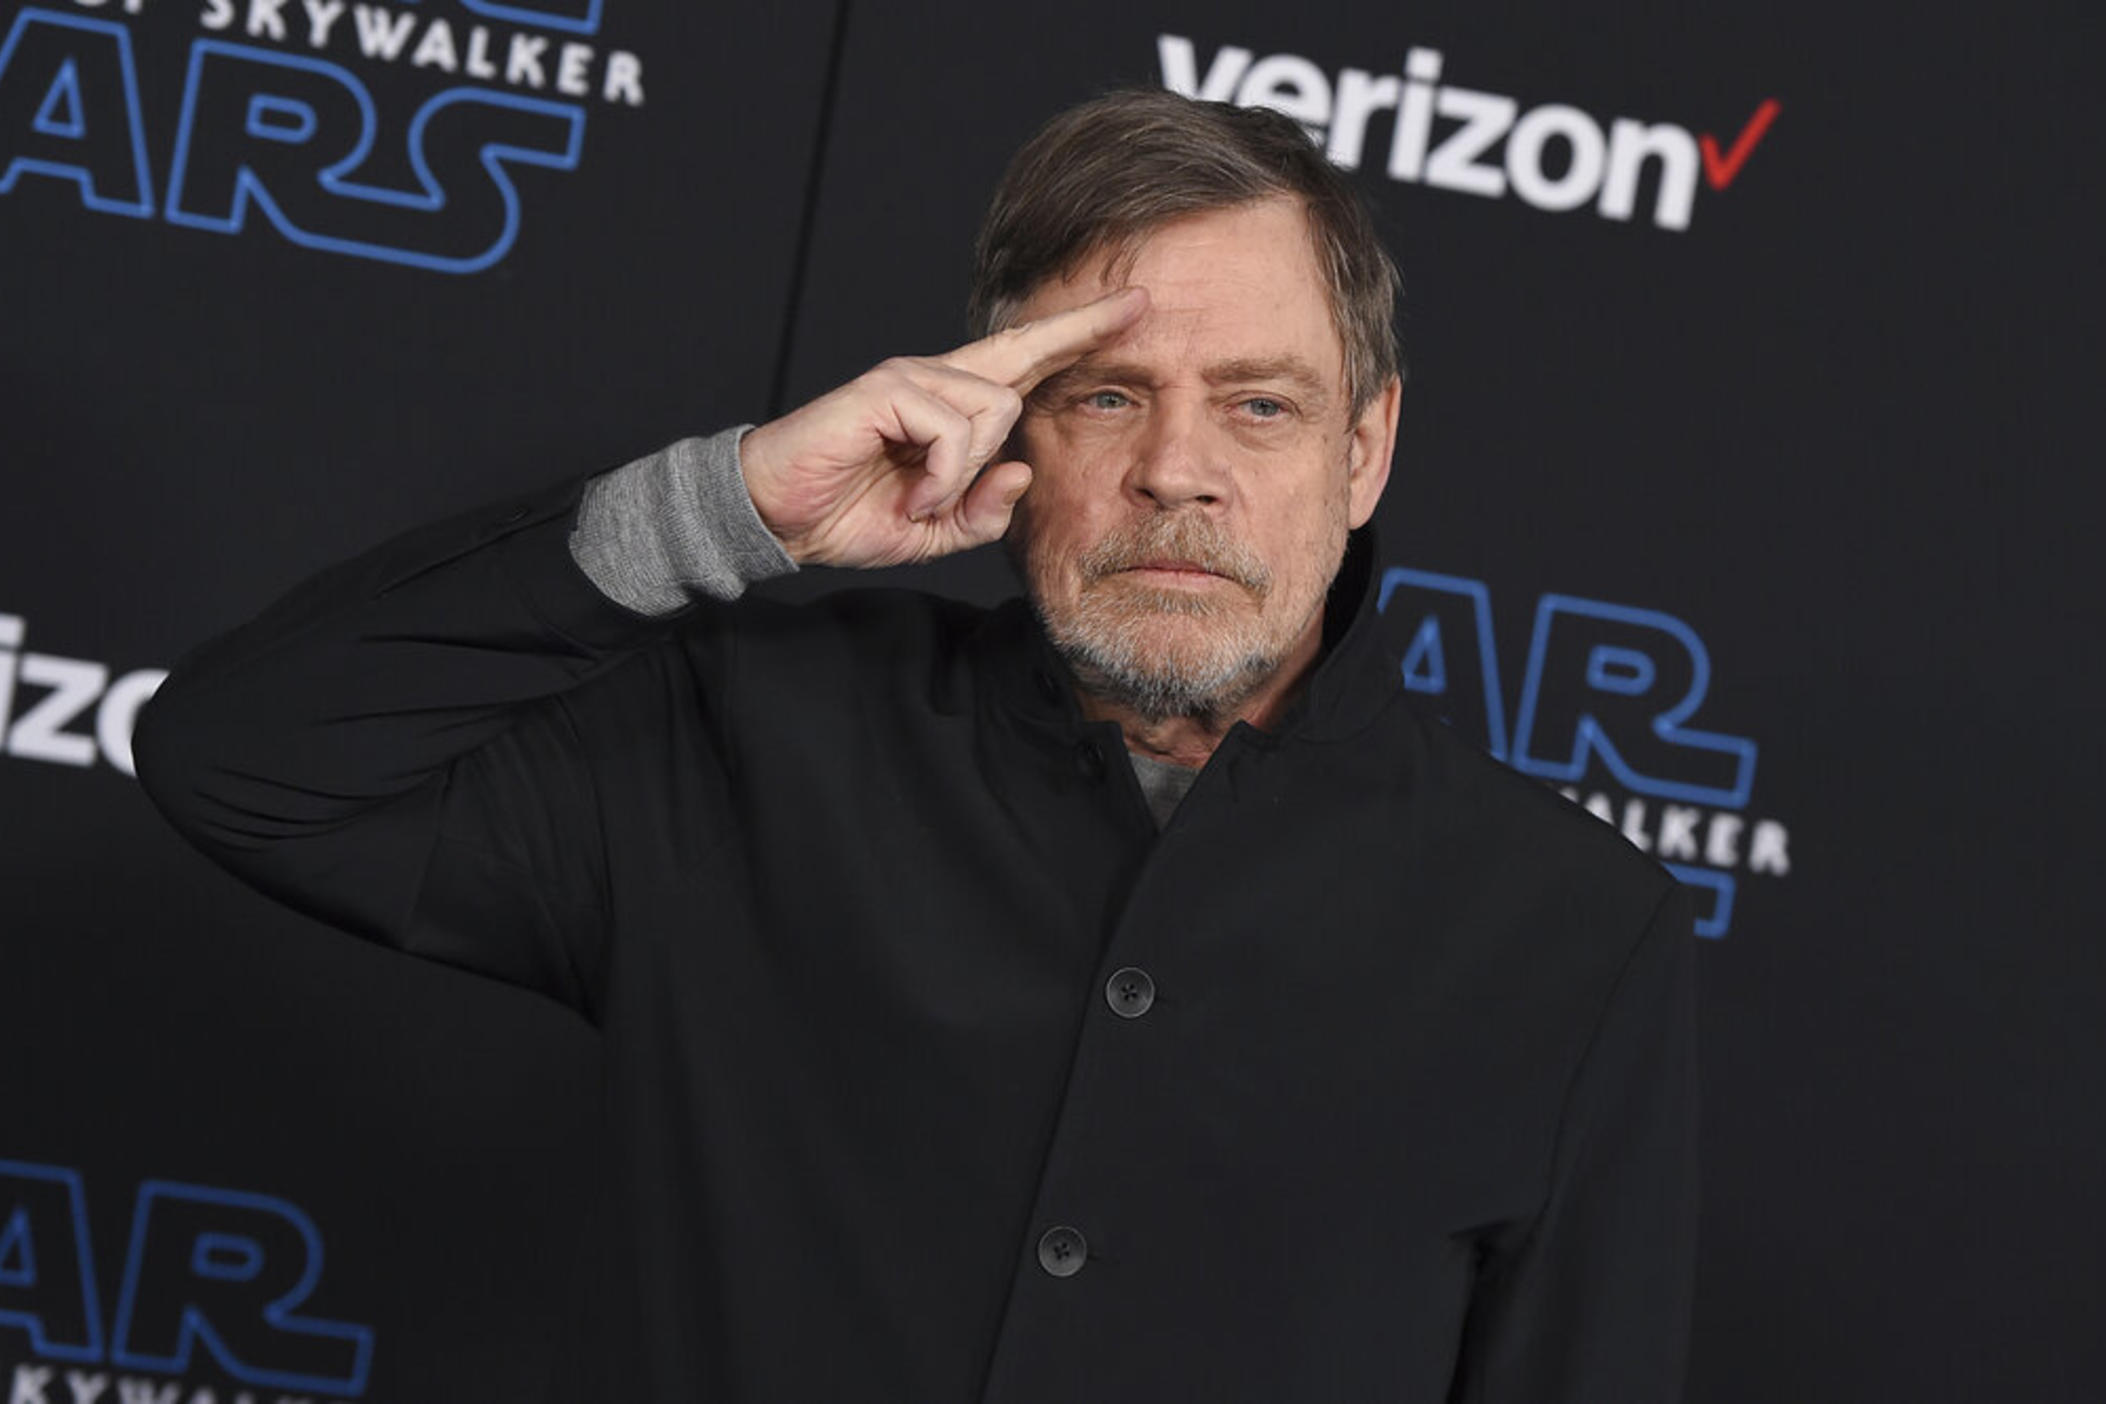 Mark Hamill is among other celebrities who have endorsed a boycott of the film industry in Georgia. But some industry workers in the state say the push could do more harm than good.